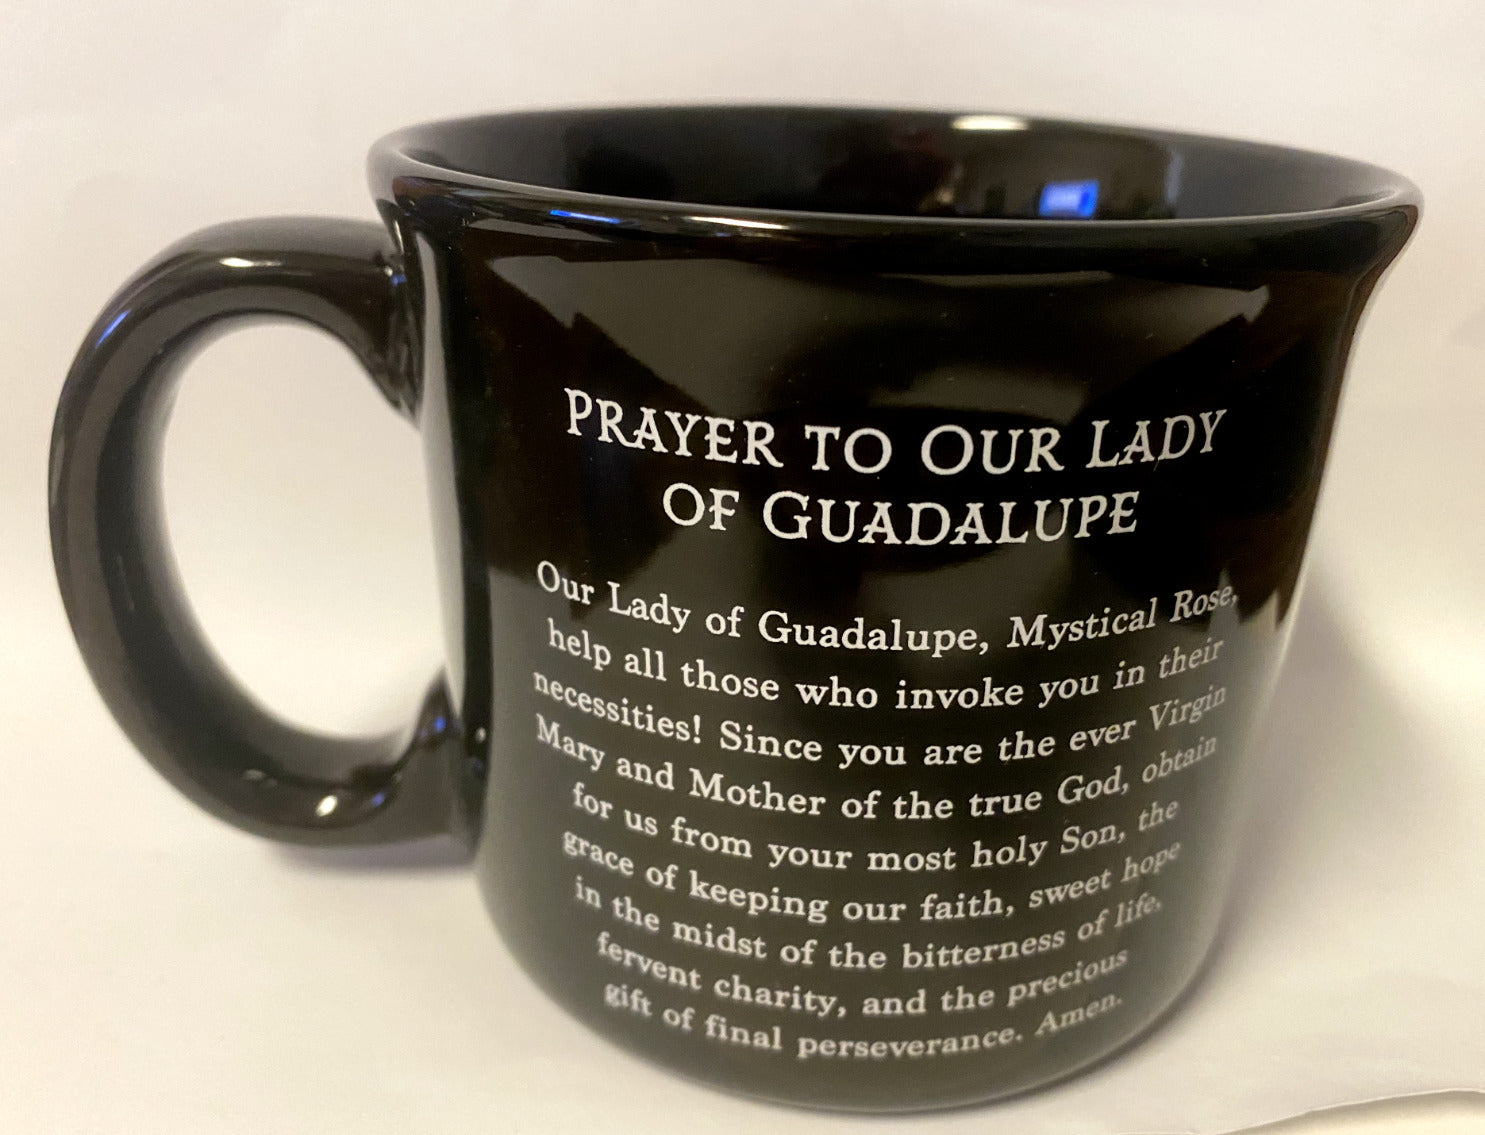 Our Lady of Guadalupe 13 oz. Cup/Mug with prayer, New - Bob and Penny Lord